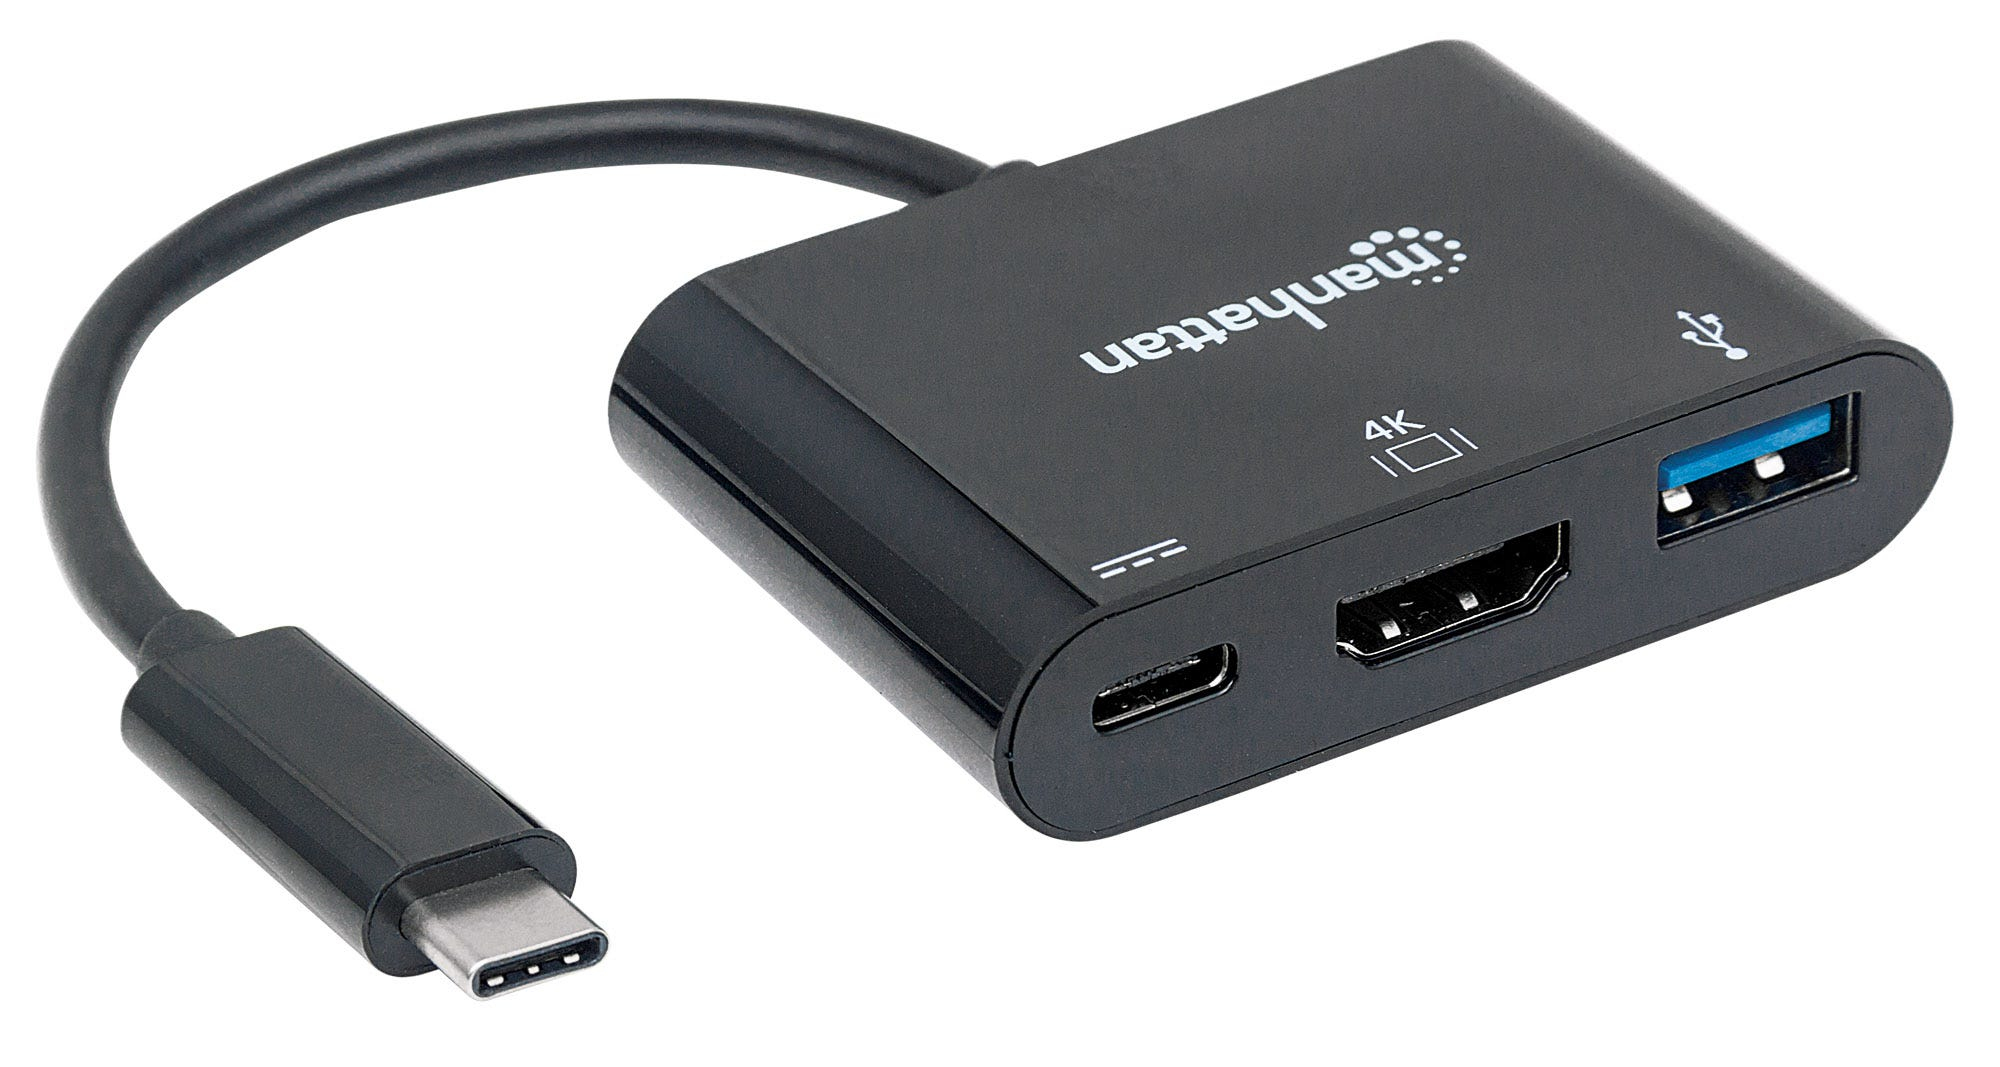 Manhattan USB-C 3-Port Hub/Dock/Converter, USB-C to HDMI, USB-C (including Power Delivery) and USB-A Ports, 5 Gbps (USB 3.2 Gen1 aka USB 3.0), HDMI 4K video: 1080p@60Hz or 3840x2160p@30Hz, Male to Females, Cable 8cm, Black, Blister